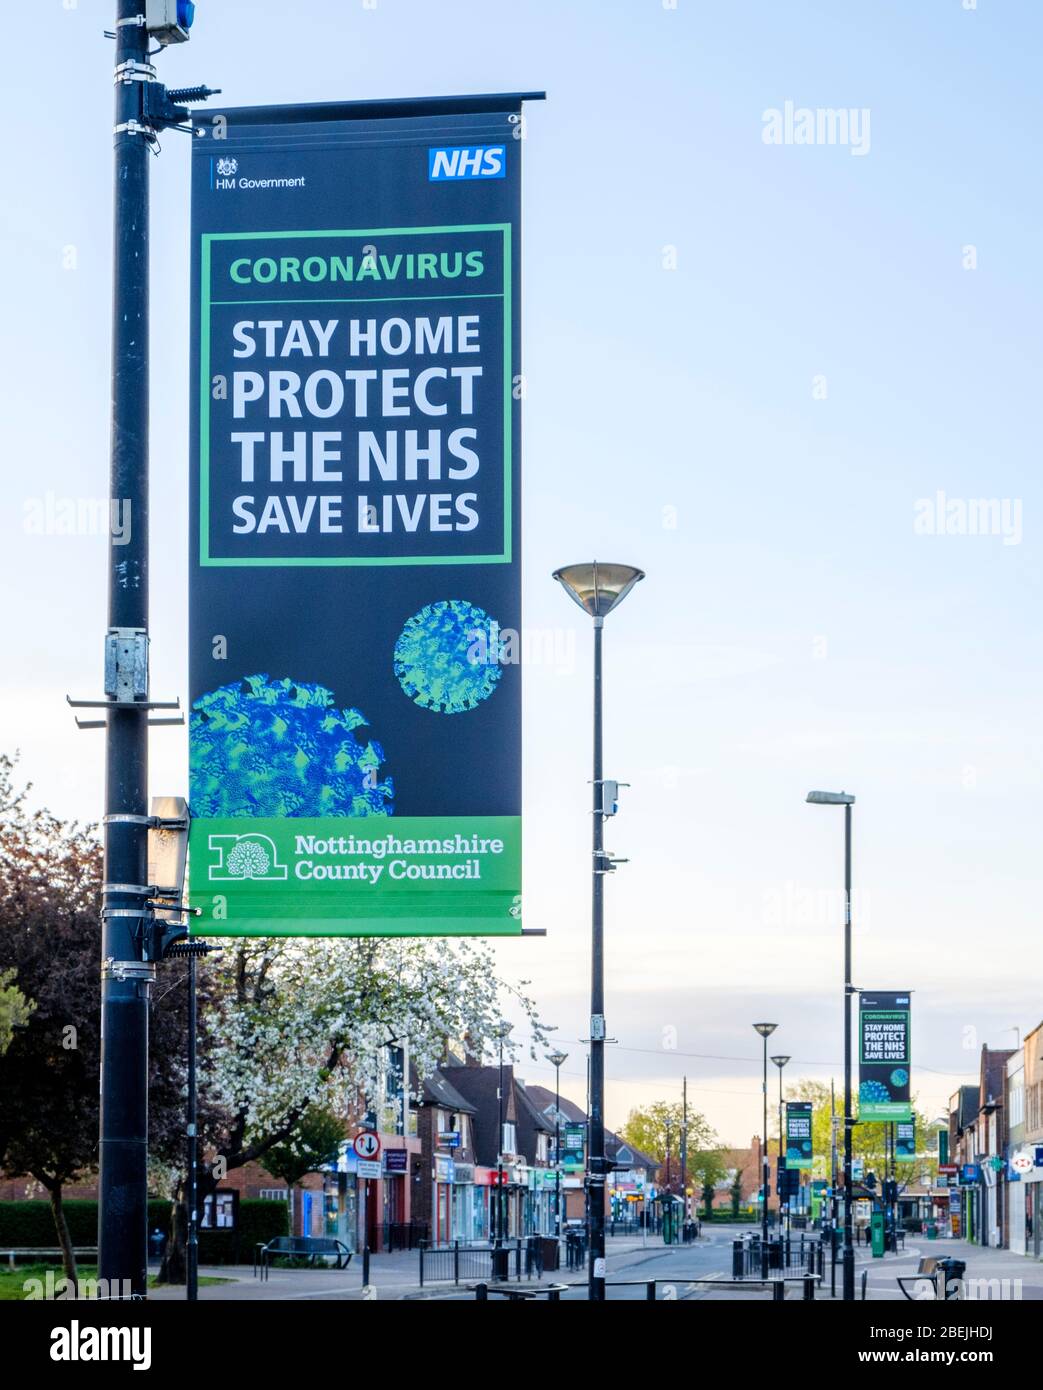 Stay home. Protect the NHS. Save lives. Coronavirus pandemic  lockdown message on an empty street, West Bridgford, Nottinghamshire, England, UK Stock Photo